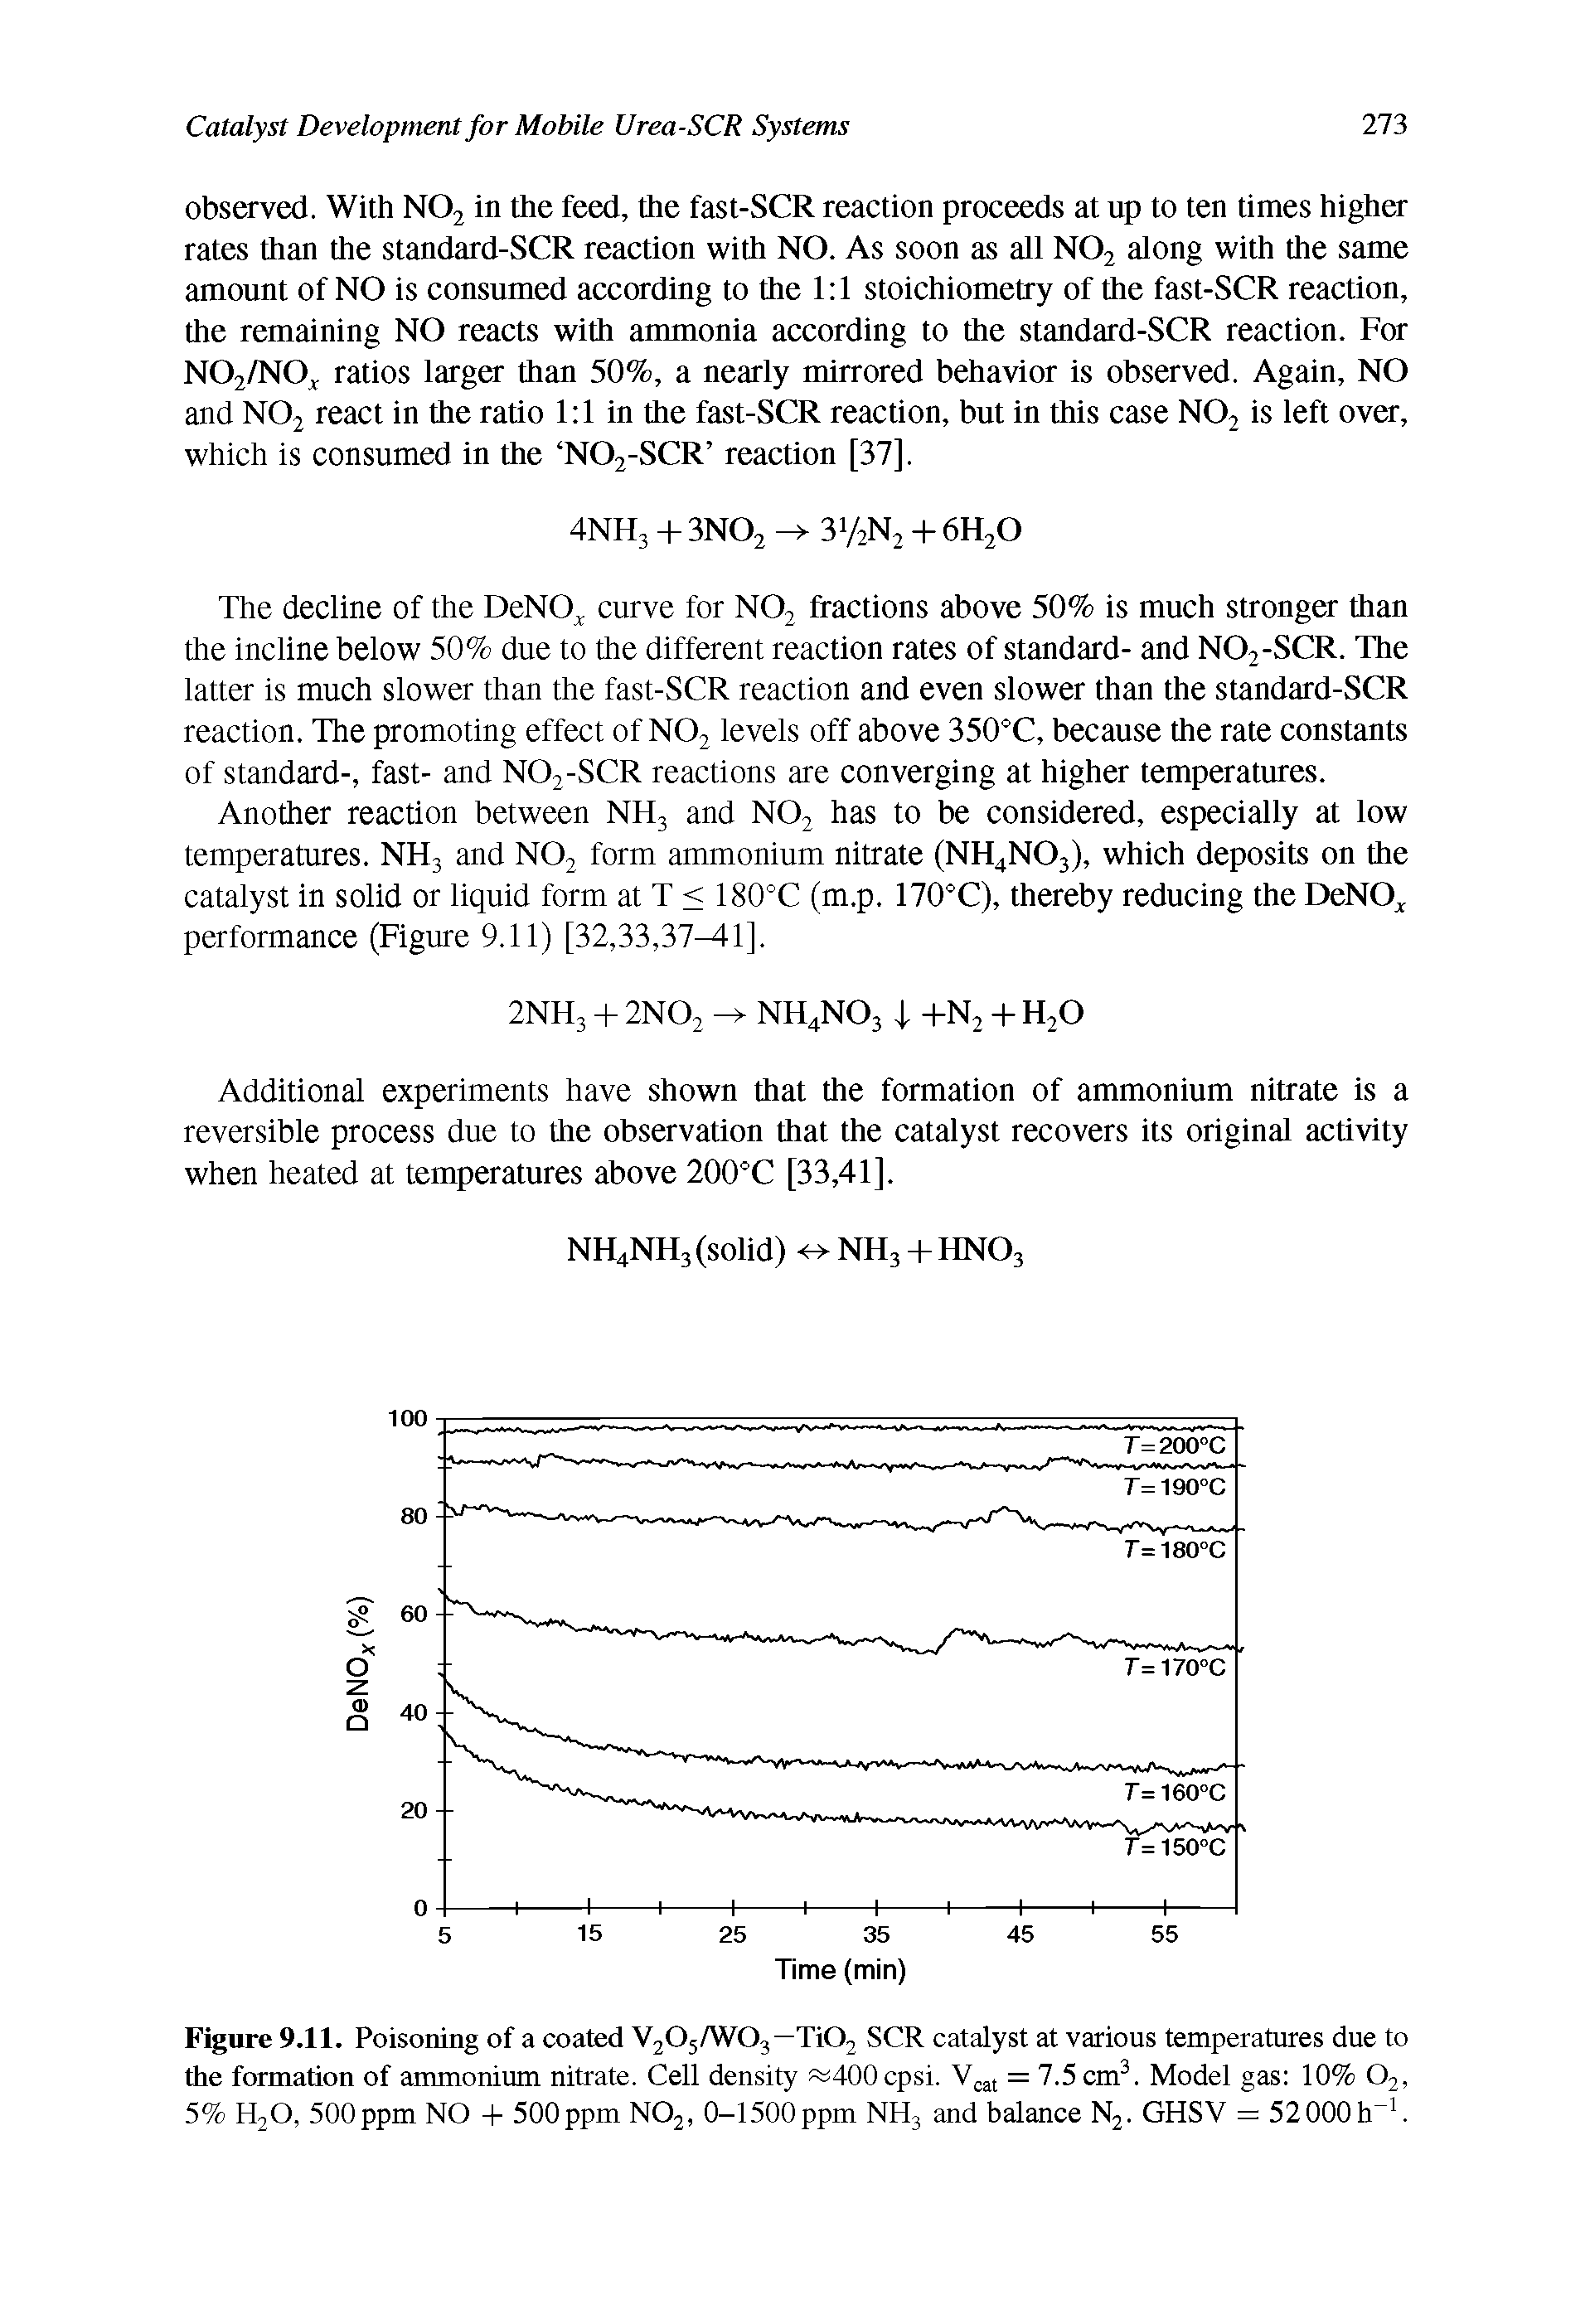 Figure 9.11. Poisoning of a coated V205/W03—TiOz SCR catalyst at various temperatures due to the formation of ammonium nitrate. Cell density 400 cpsi. Vcat = 7.5 cm3. Model gas 10% 02, 5% H20, 500ppm NO + 500ppm N02, 0-1500ppm NH3 and balance N2. GHSV = 52000 h 1.